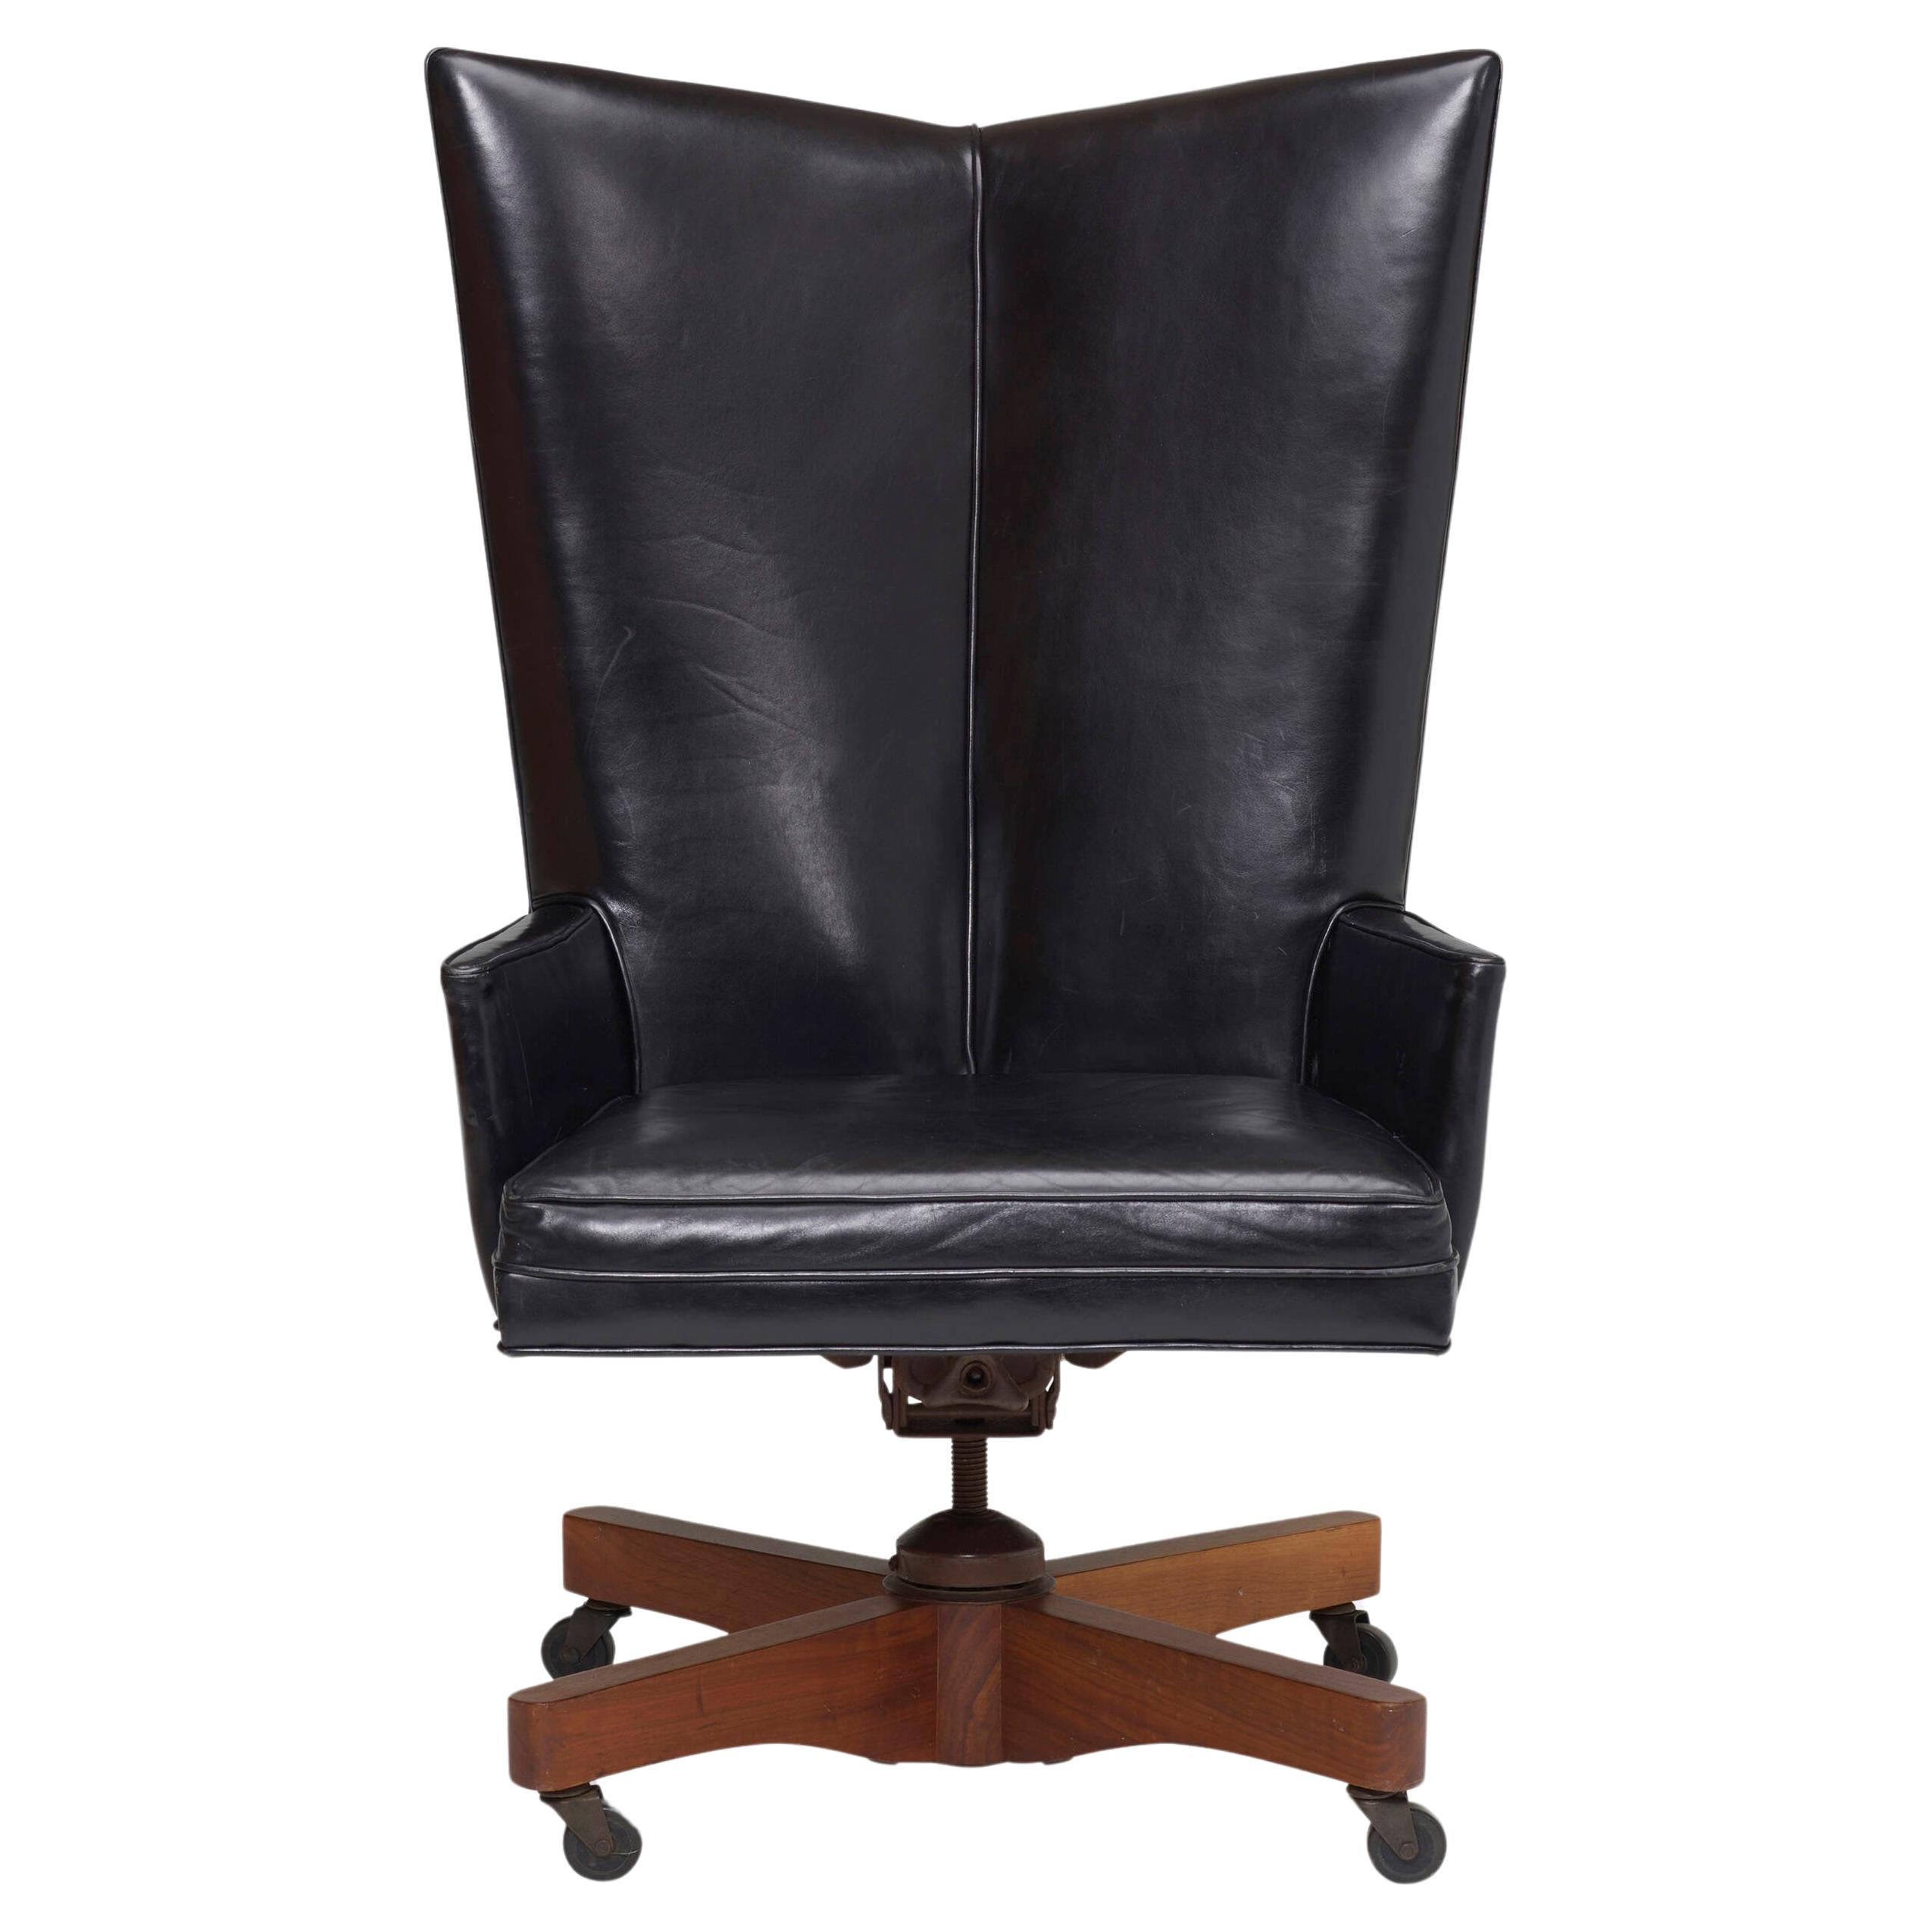 The original executive high wing back desk chair on casters designed by Paul McCobb.

Feel free to request a delivery rate and we will do our best to search for the most reasonable quote.
